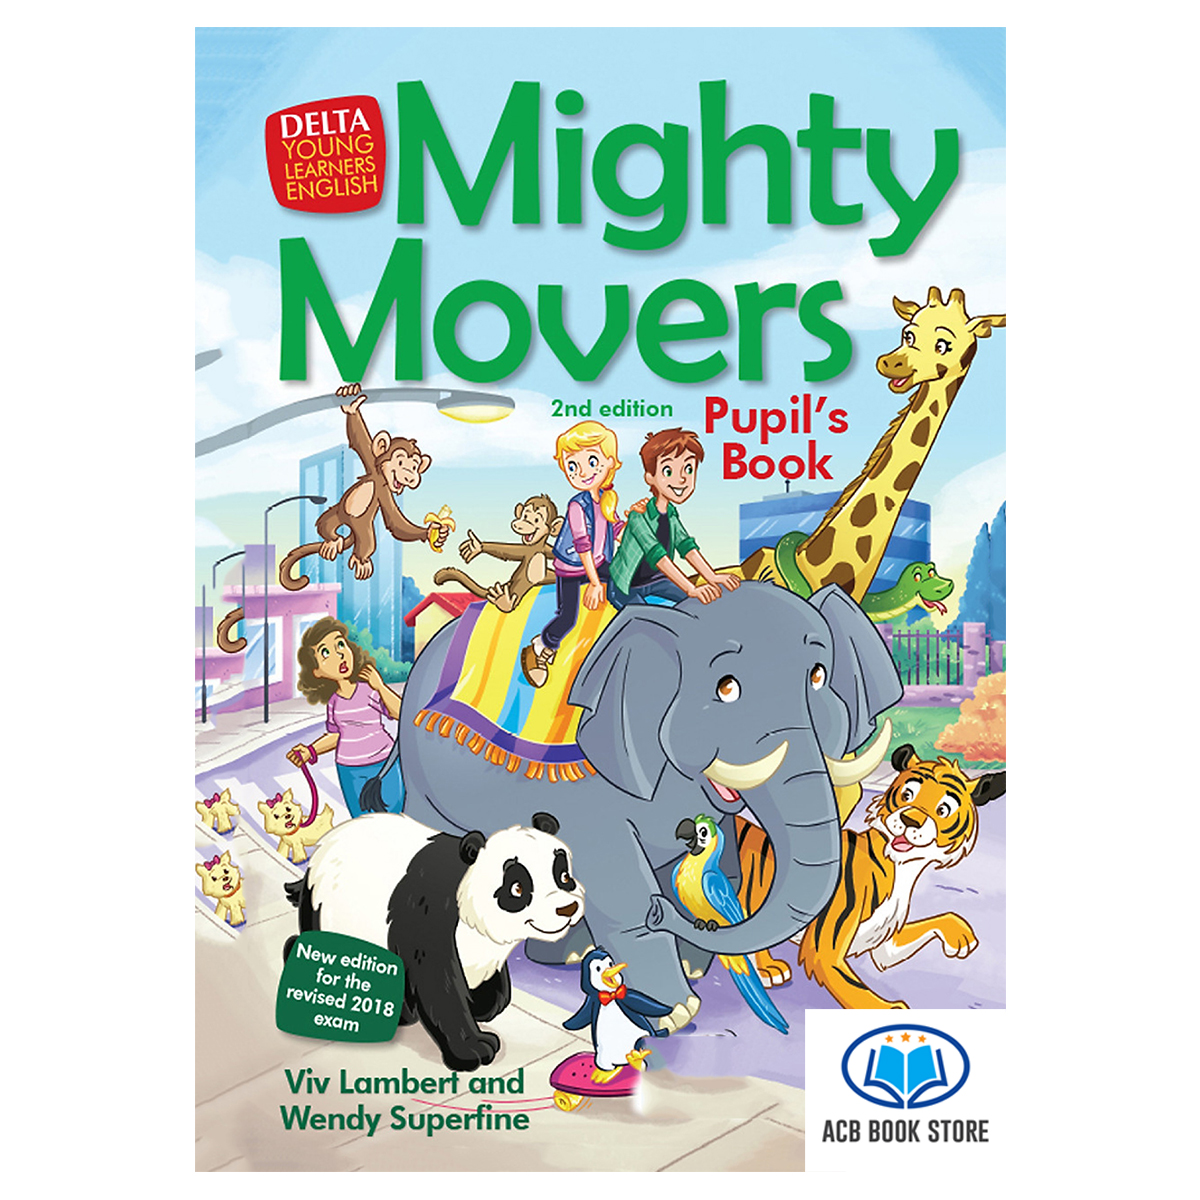 Sách Mighty Movers 2nd edition Pupils Book - ACB Bookstore